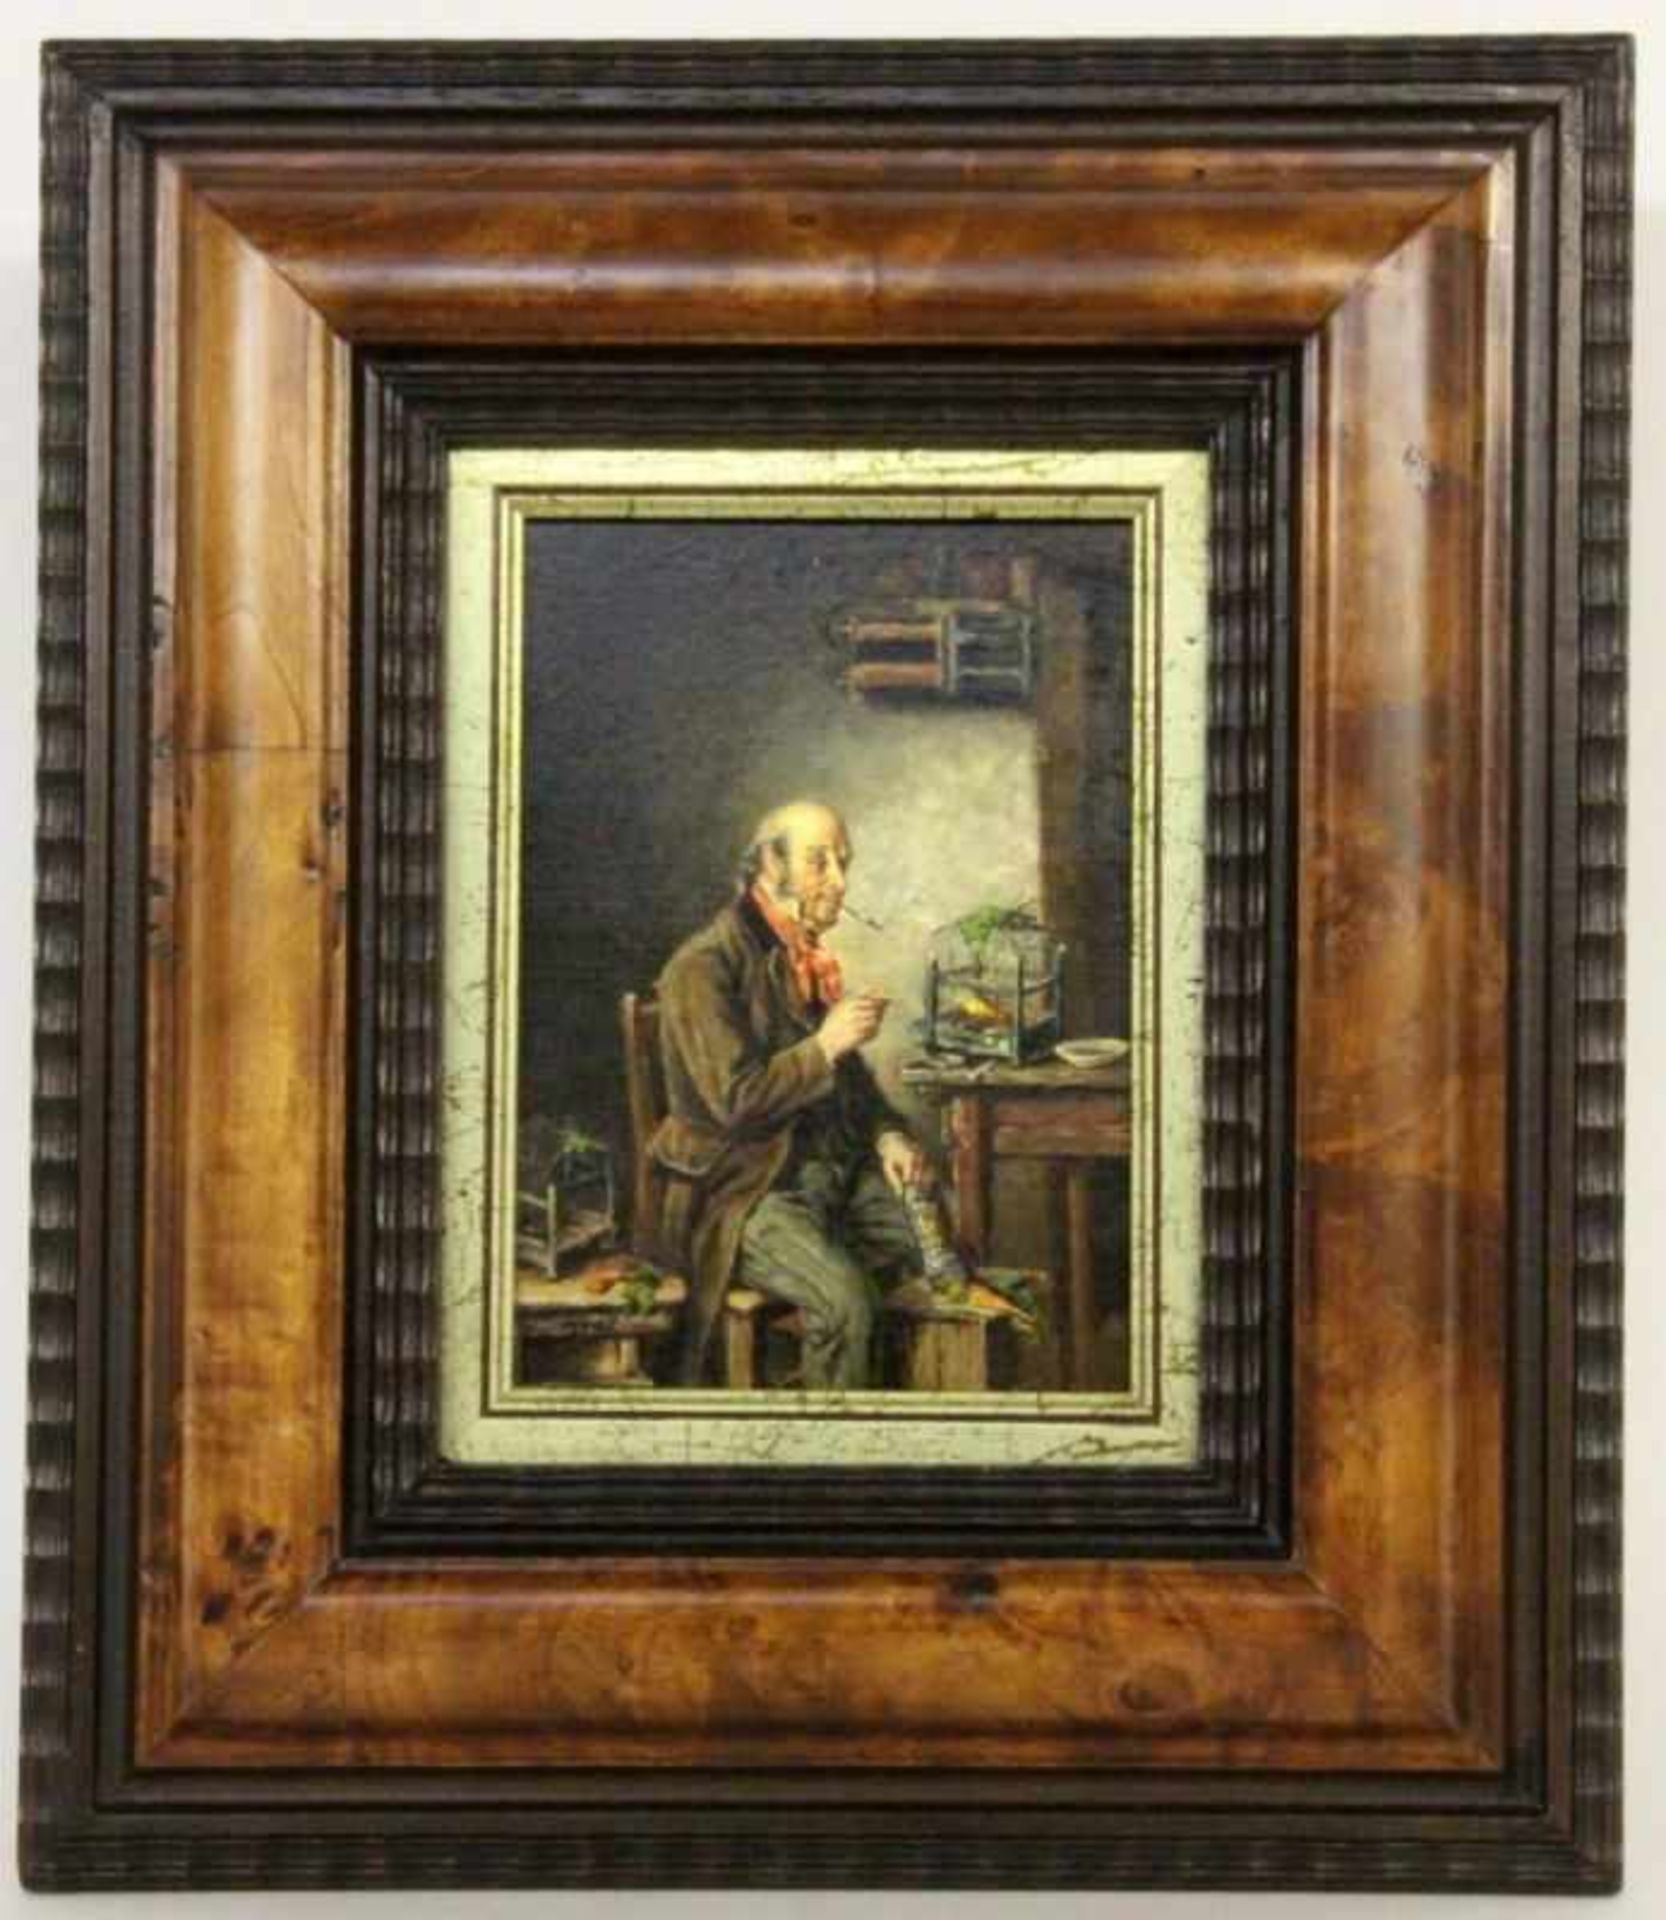 KRAL 20th century Man with Birdcage in the Parlour. Oil on panel, signed. 18 x 13 cm,framed.KRAL20.